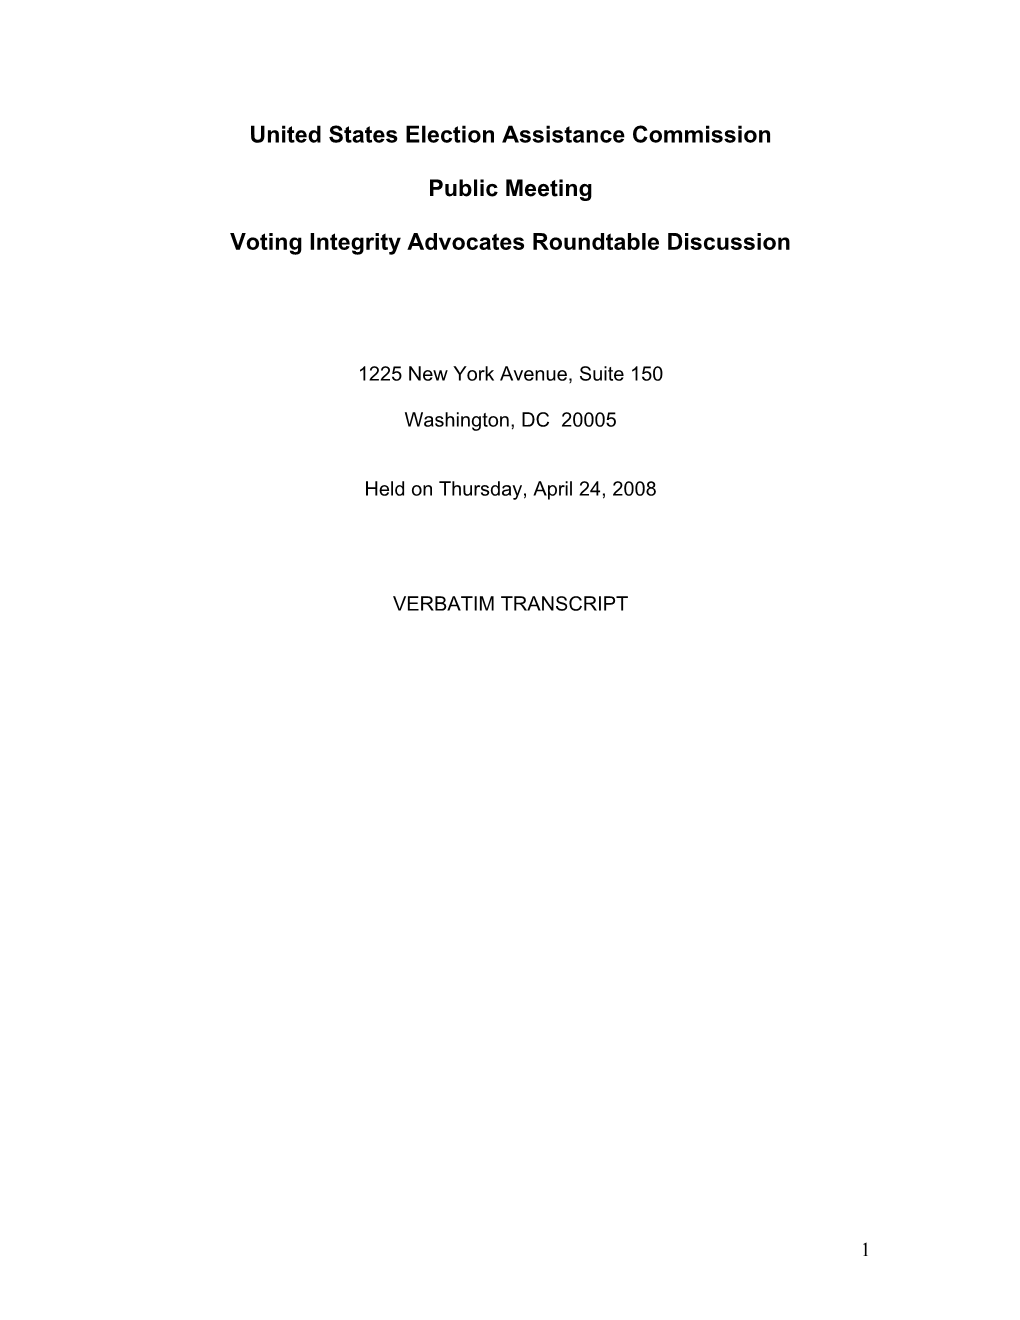 United States Election Assistance Commission Public Meeting Voting Integrity Advocates Roundtable Discussion